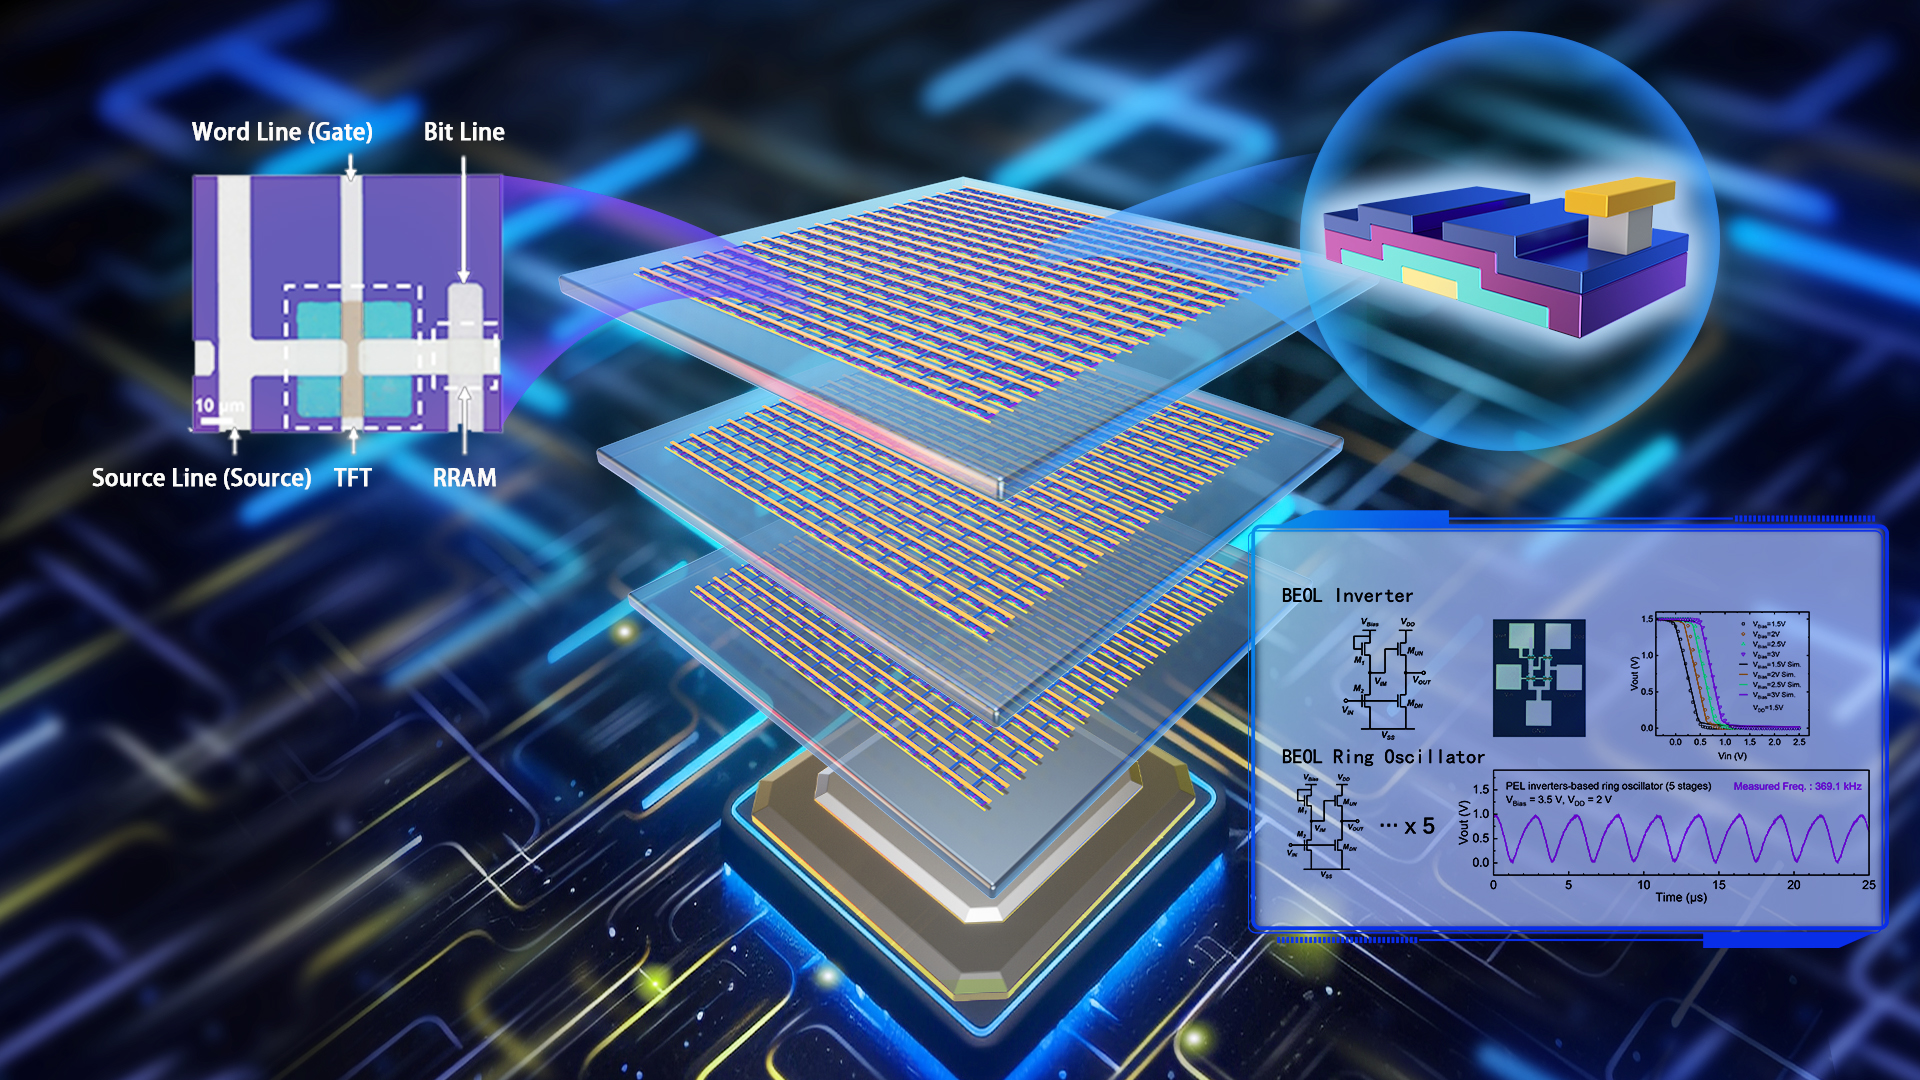 Researchers make advances in field of low-temperature processable oxide semiconductors for next-generation Monolithic 3-D integrated circuit technology